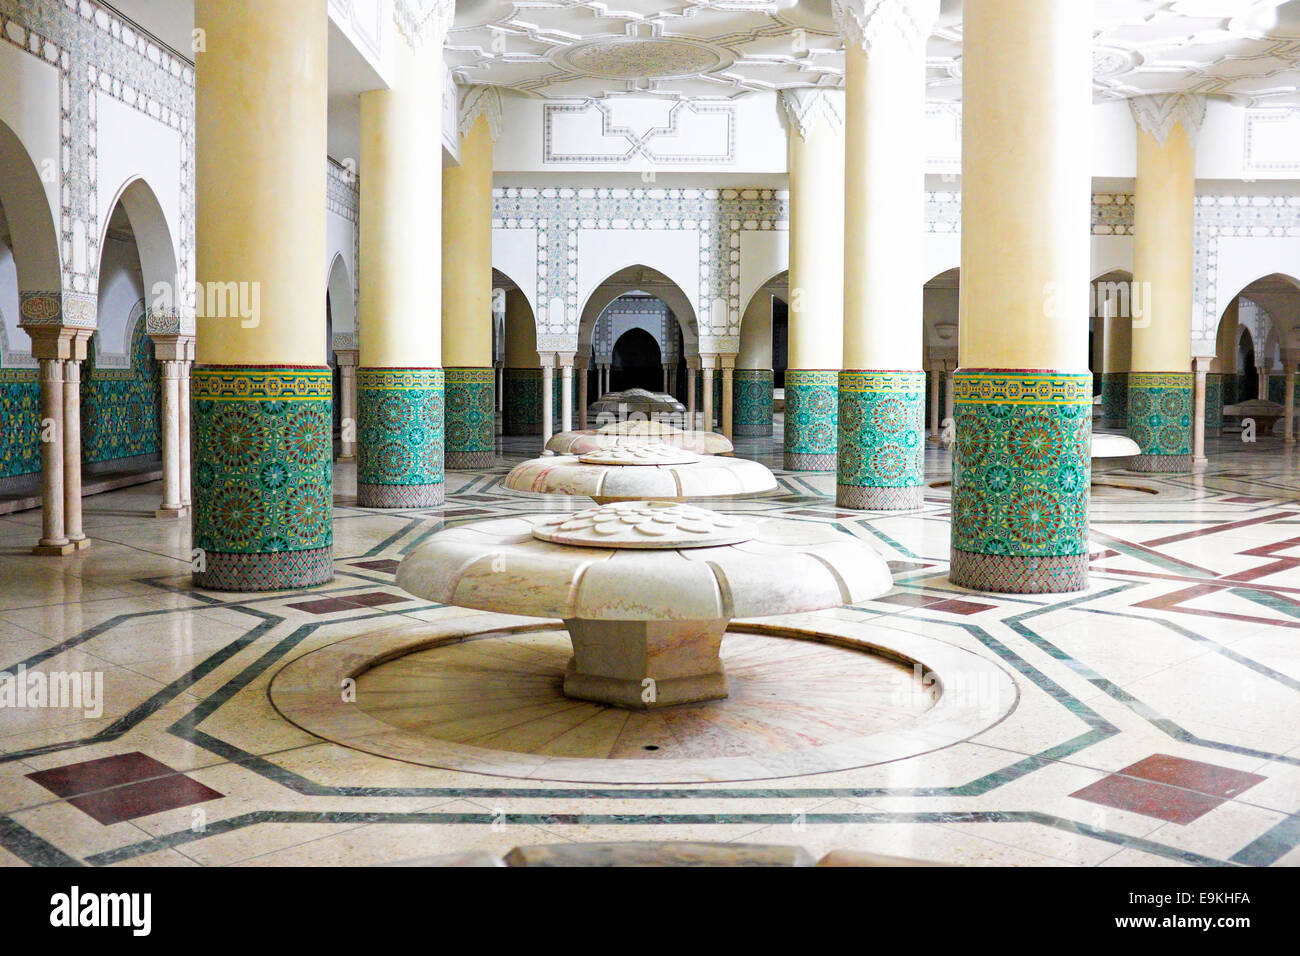 Interior arches and mosaic tile work of hammam turkish bath in Hassan II Mosque in Casablanca, Morocco. Stock Photo